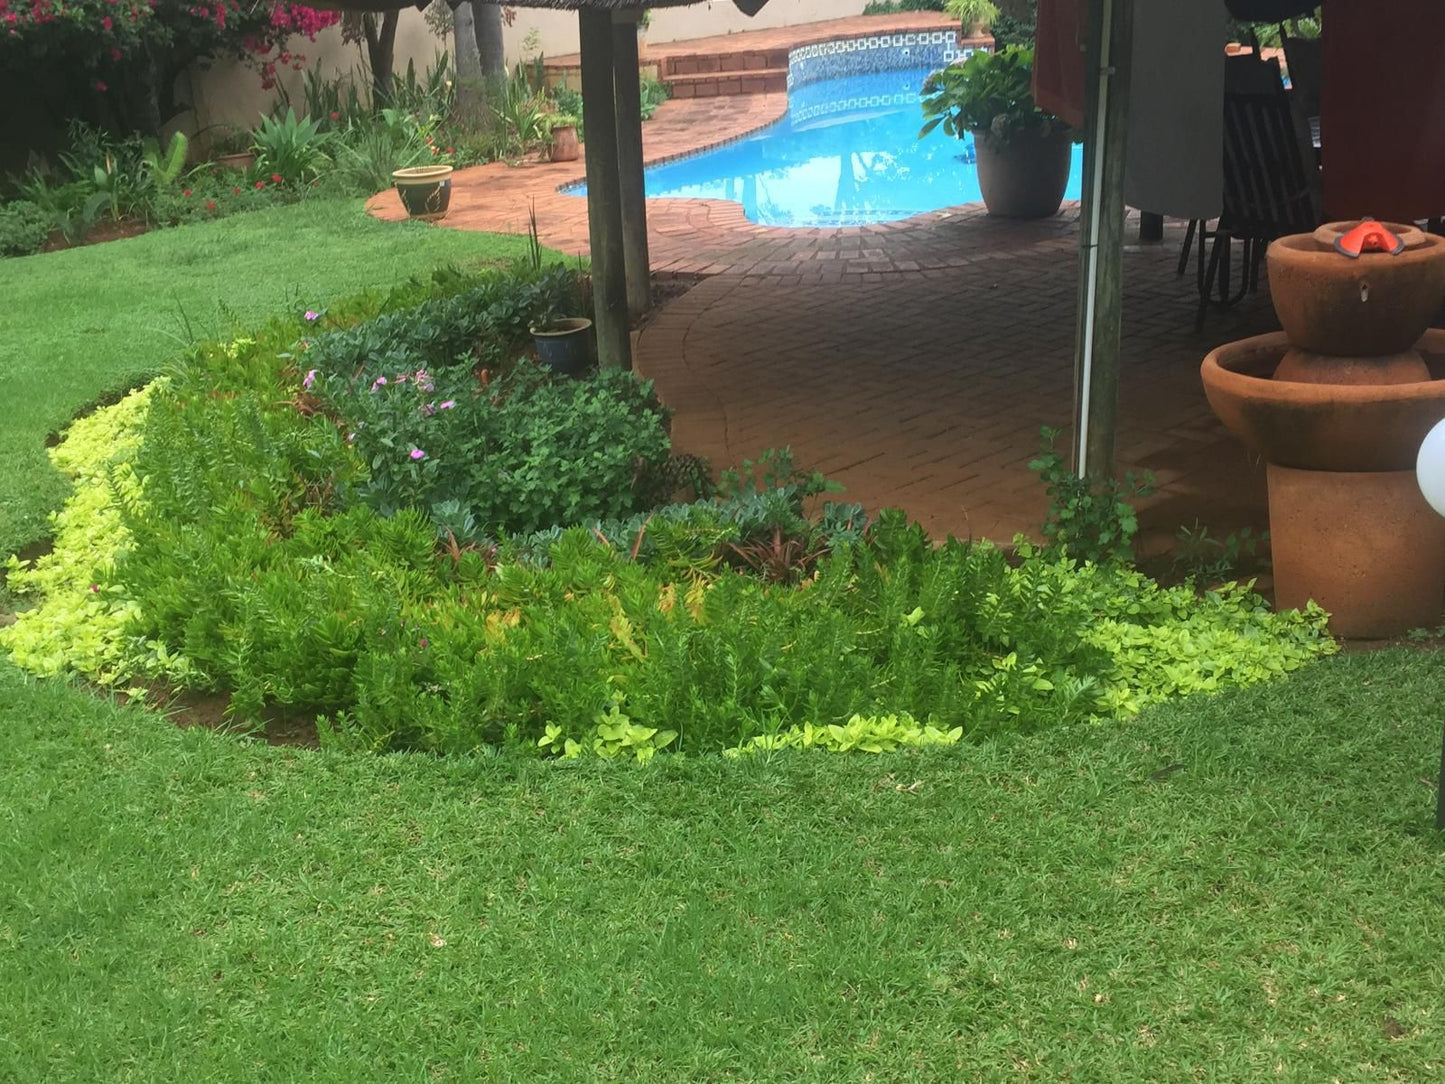 Meraki Guesthouse Cashan Rustenburg North West Province South Africa Plant, Nature, Garden, Swimming Pool